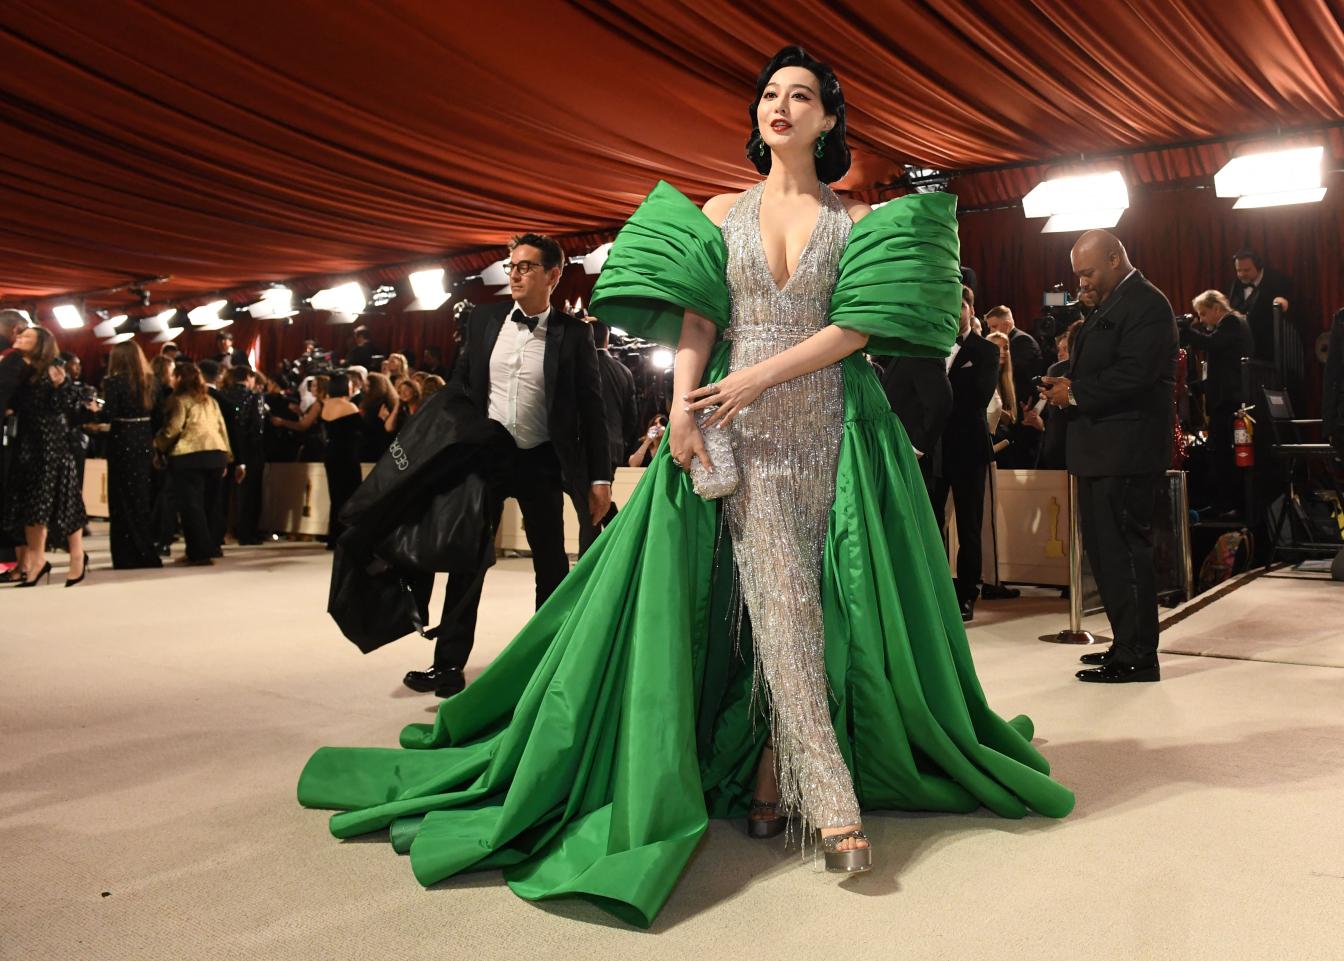 Chinese actress Fan Bingbing attends the 95th Annual Academy Awards at the Dolby Theatre in Hollywood